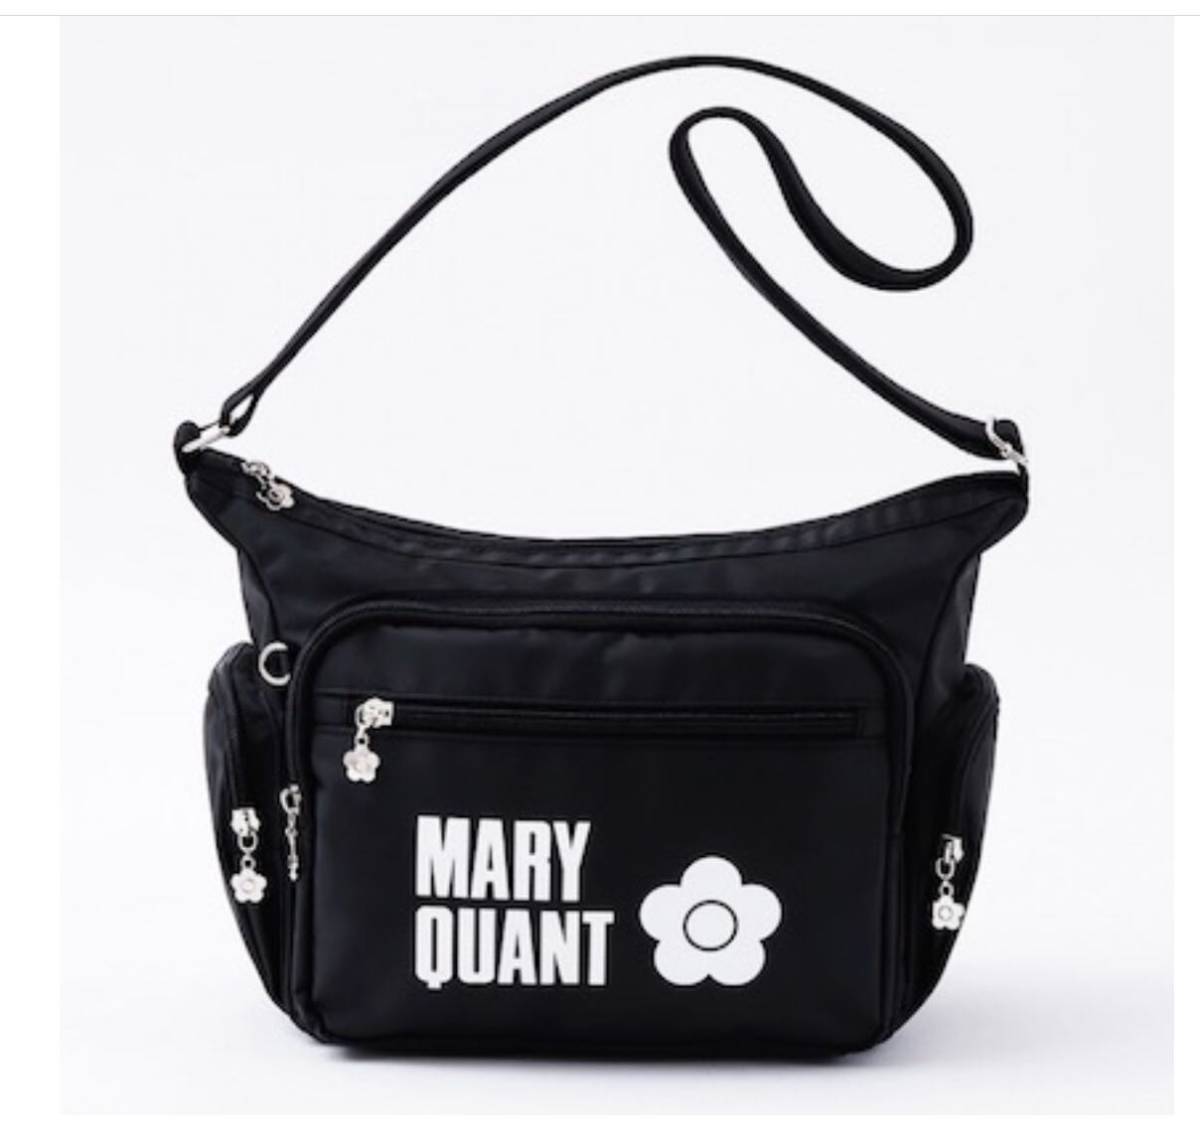  complete sale MARY QUANT special package ver. appendix MARY QUANT 6 pocket shoulder bag Mary Quant Family mart limitation 